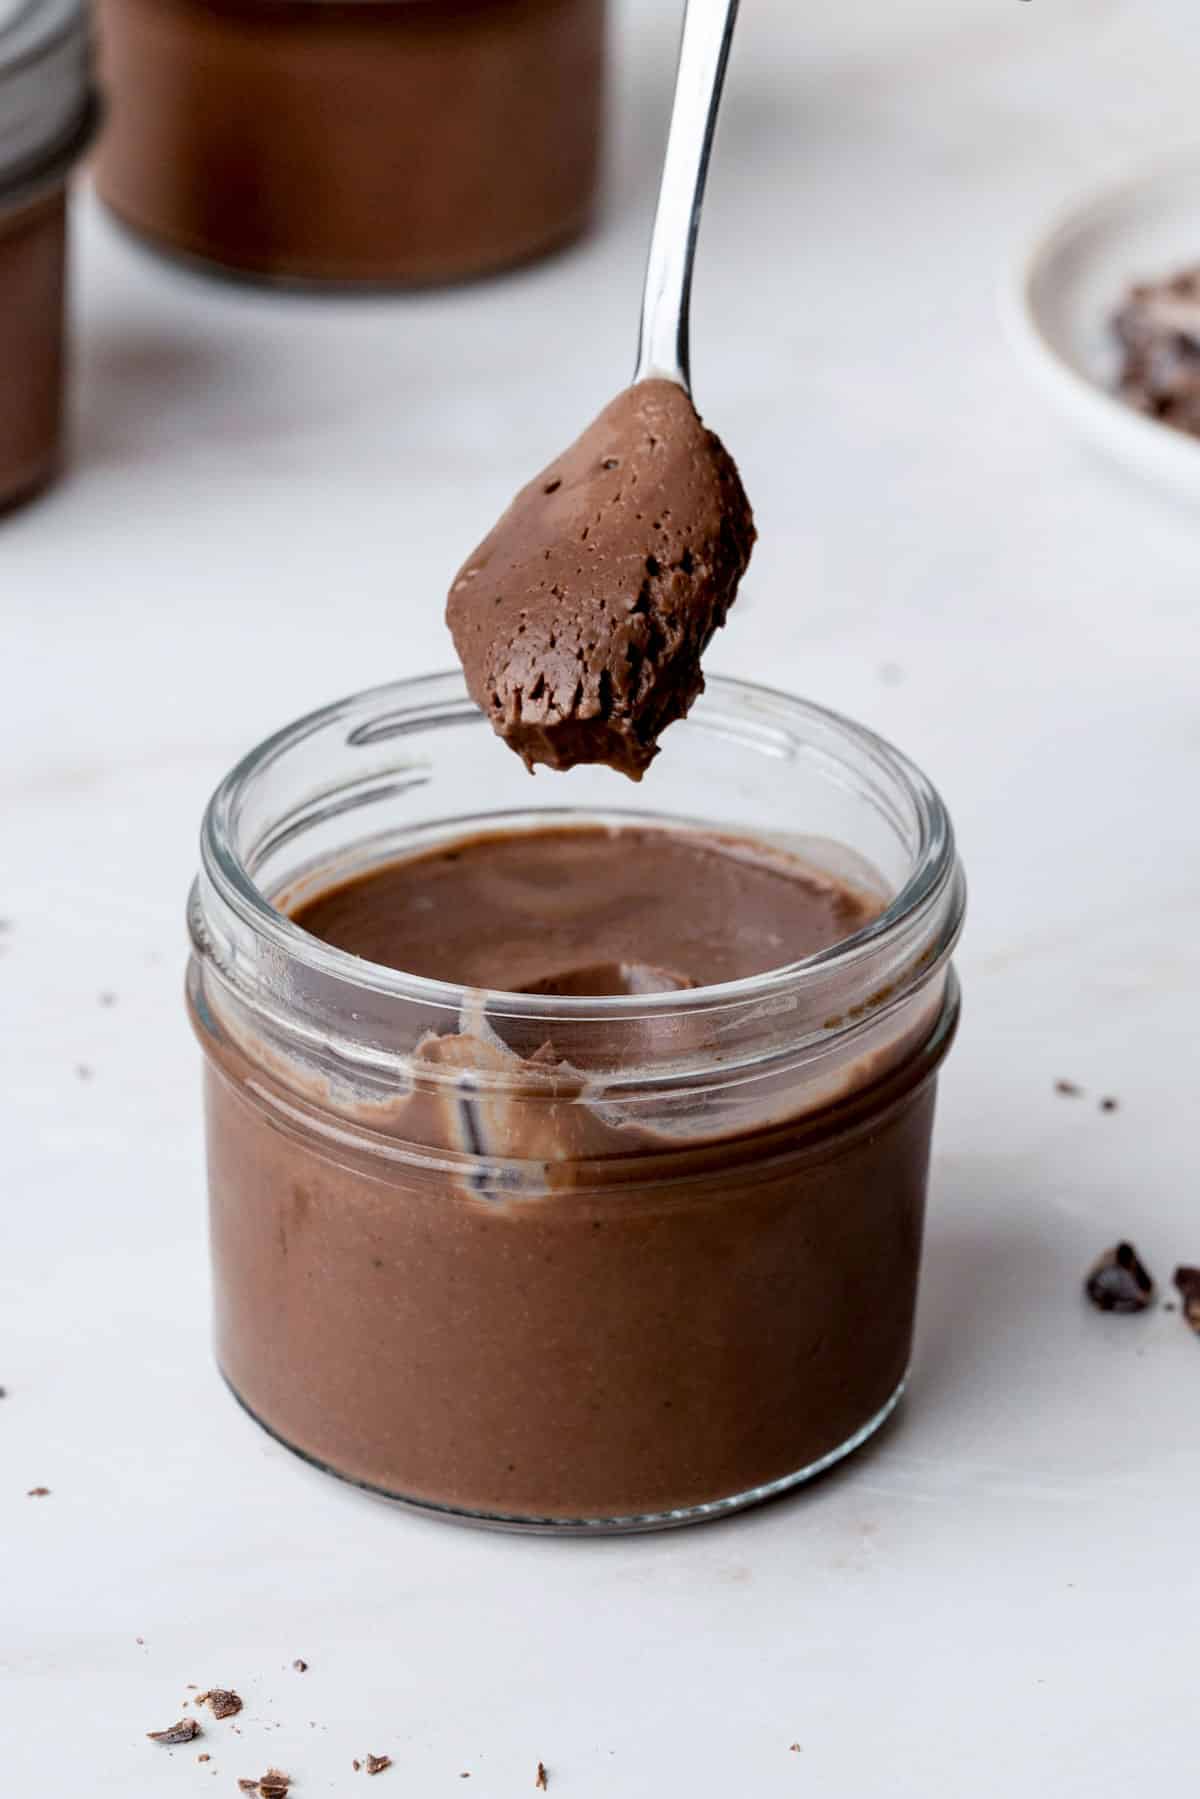 a spoon of chocolate creme being taken out of a jar